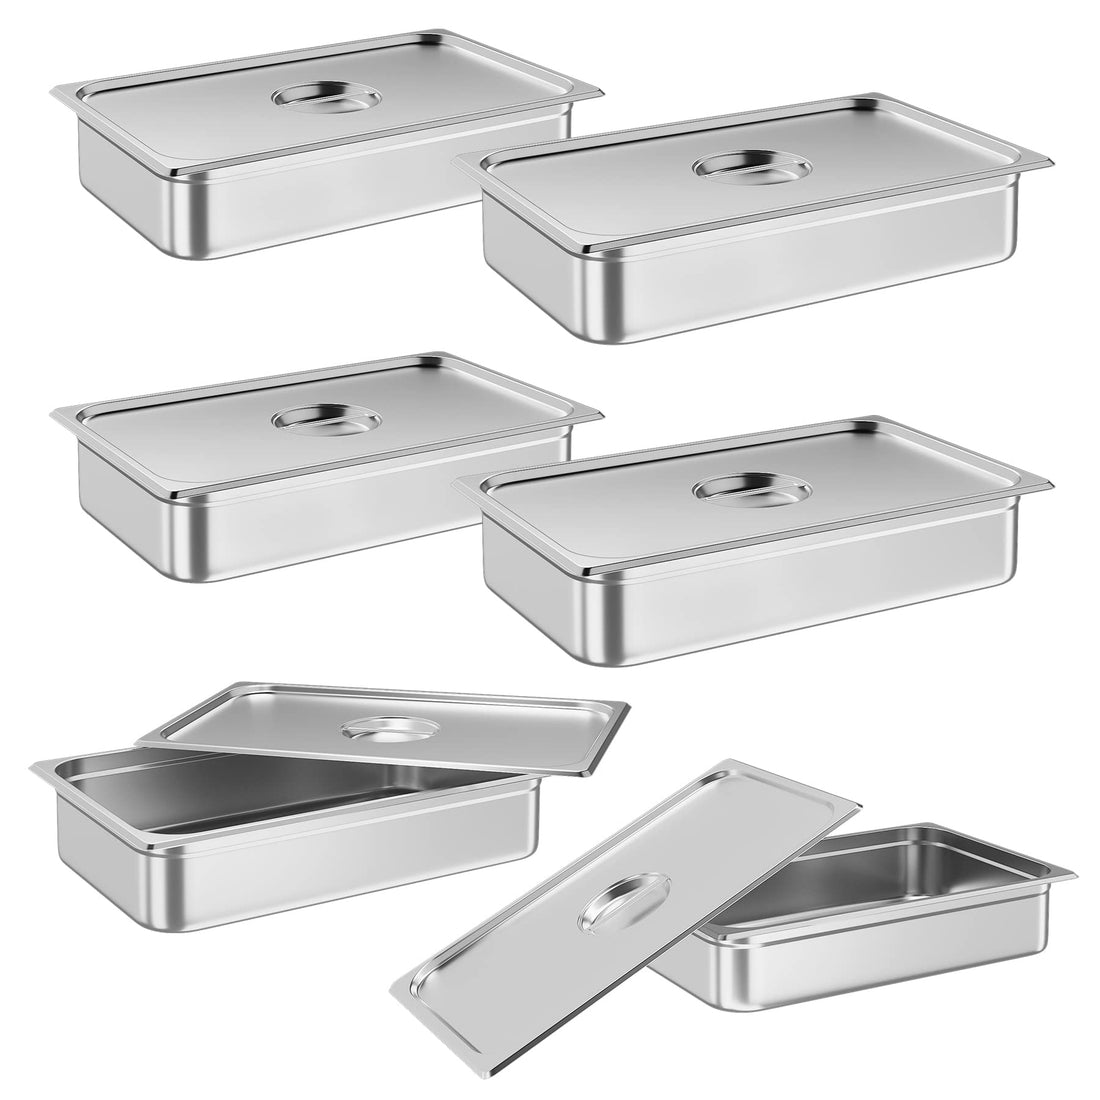 6 Pack Full Size Pan Commercial Stainless Steel Anti-Jamming Steam Table Pan